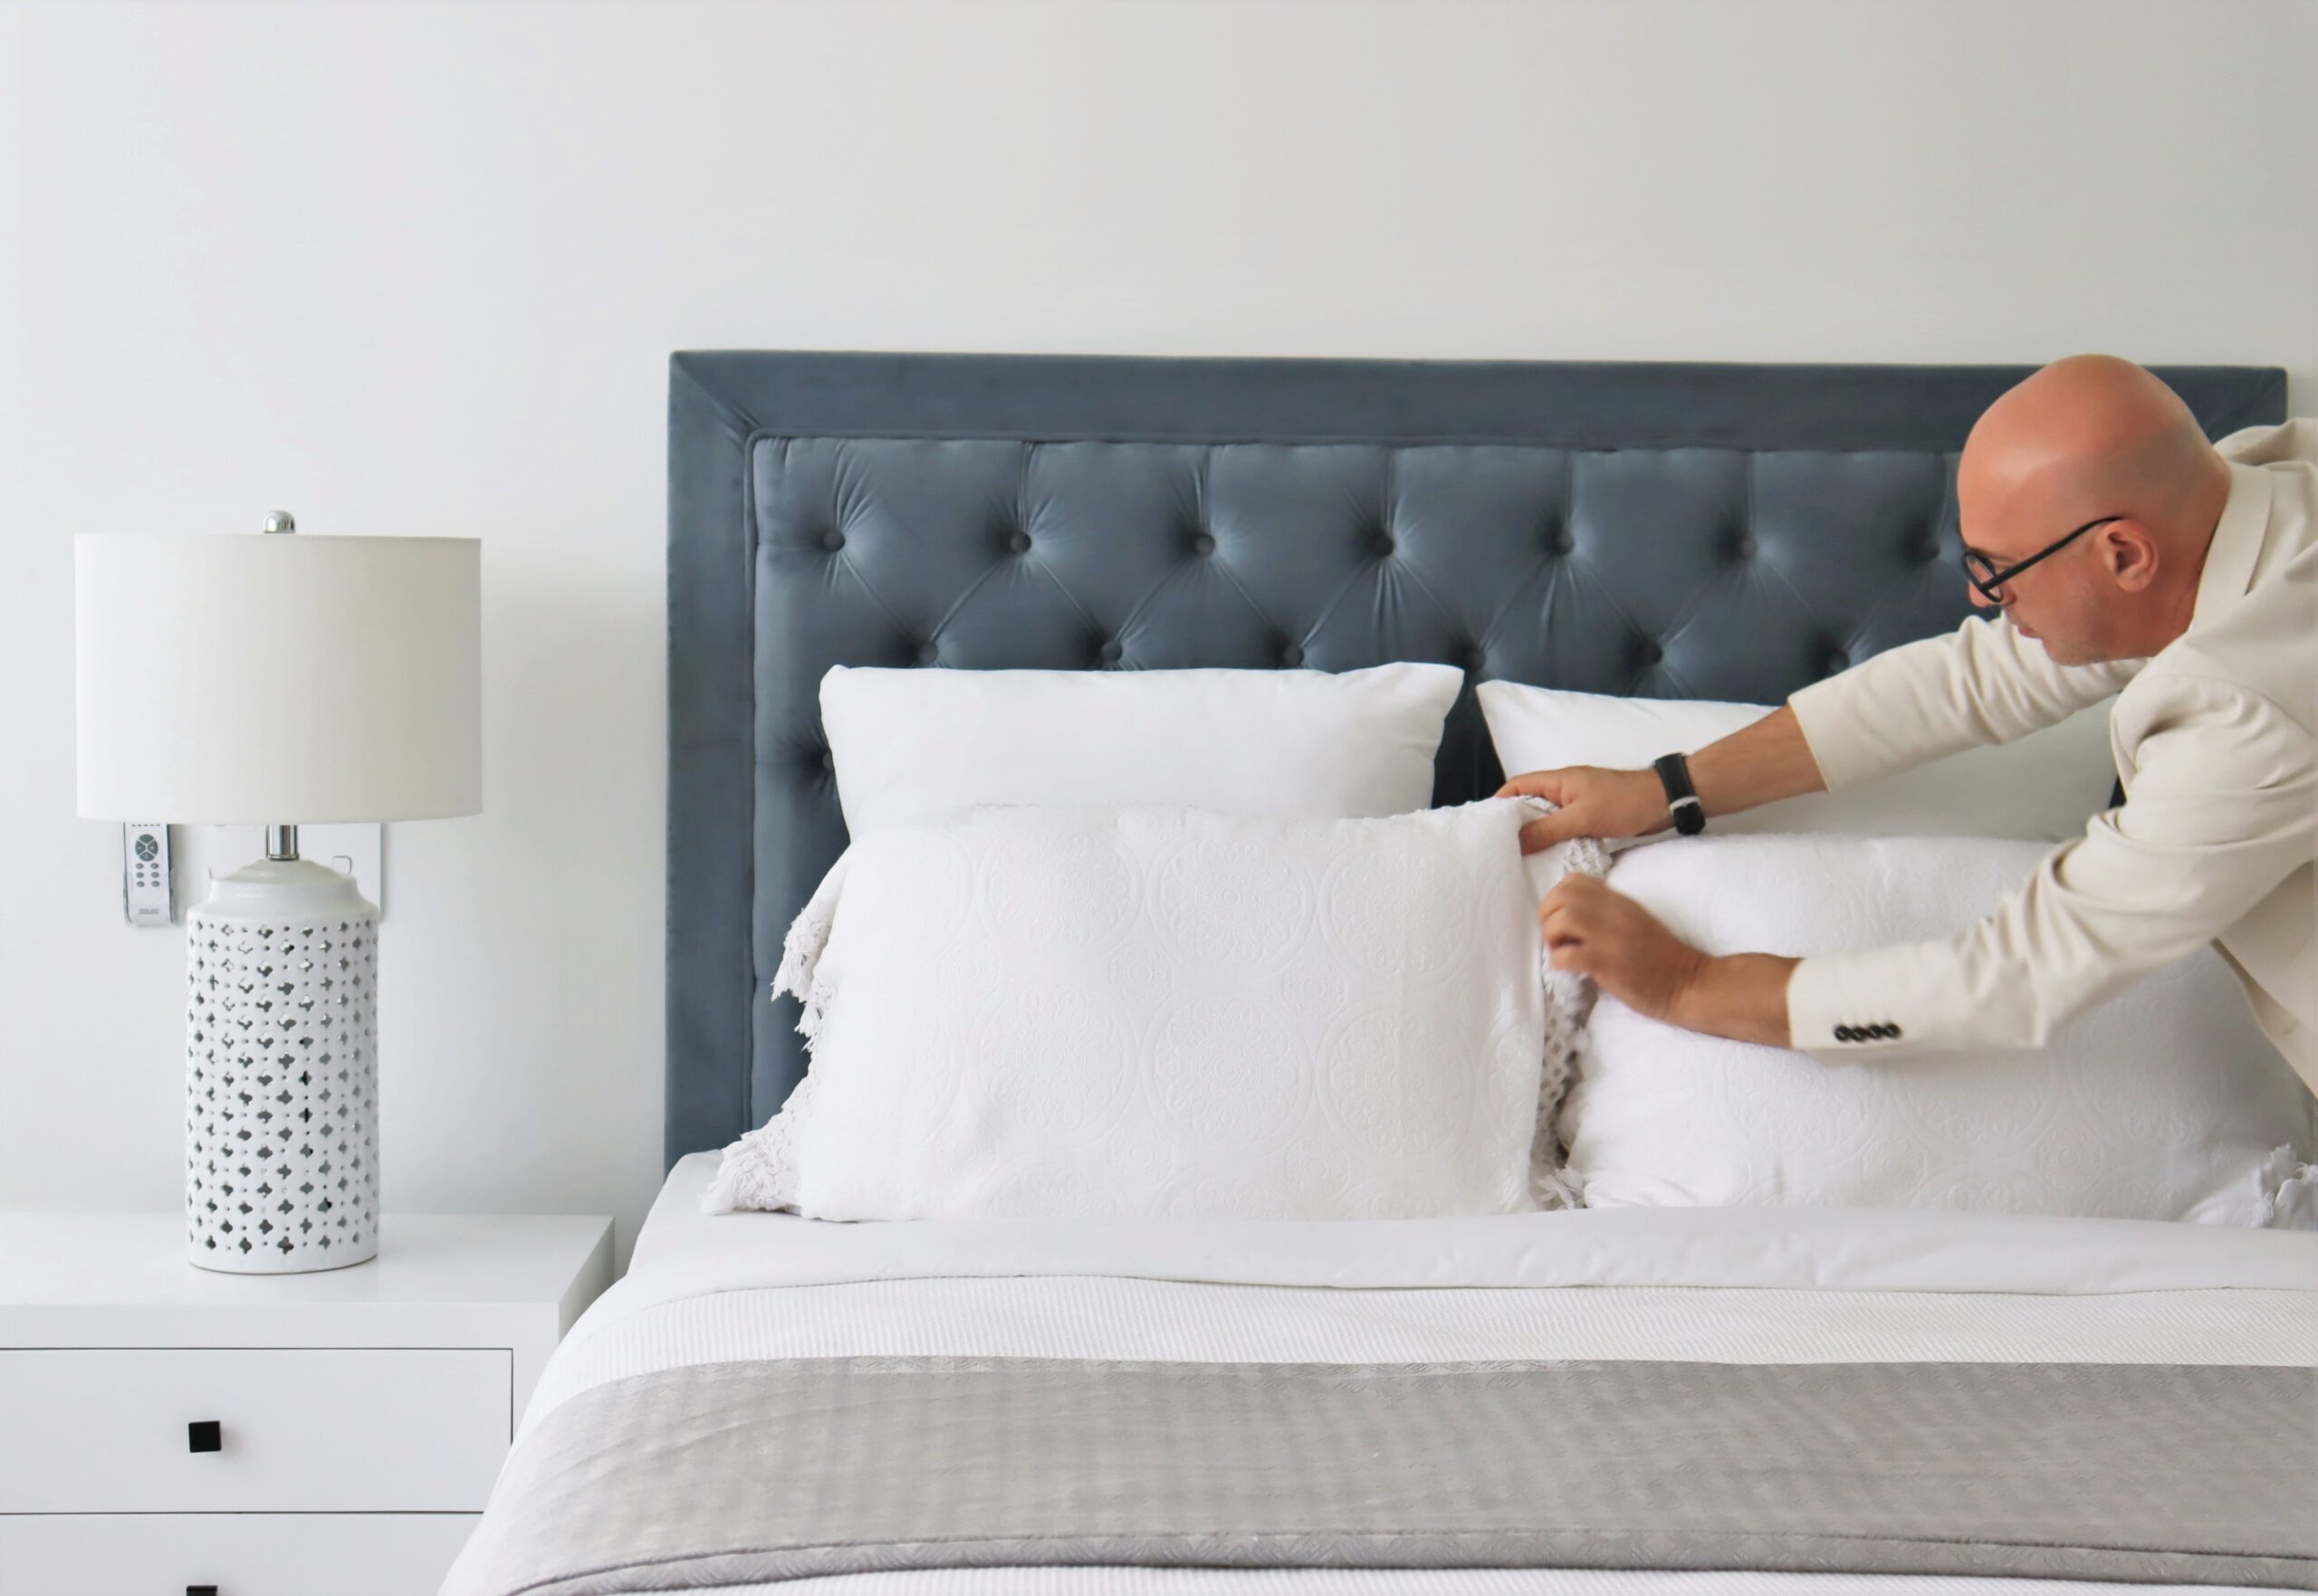 An expert stylist arranging the pillows on a bed ready for sale